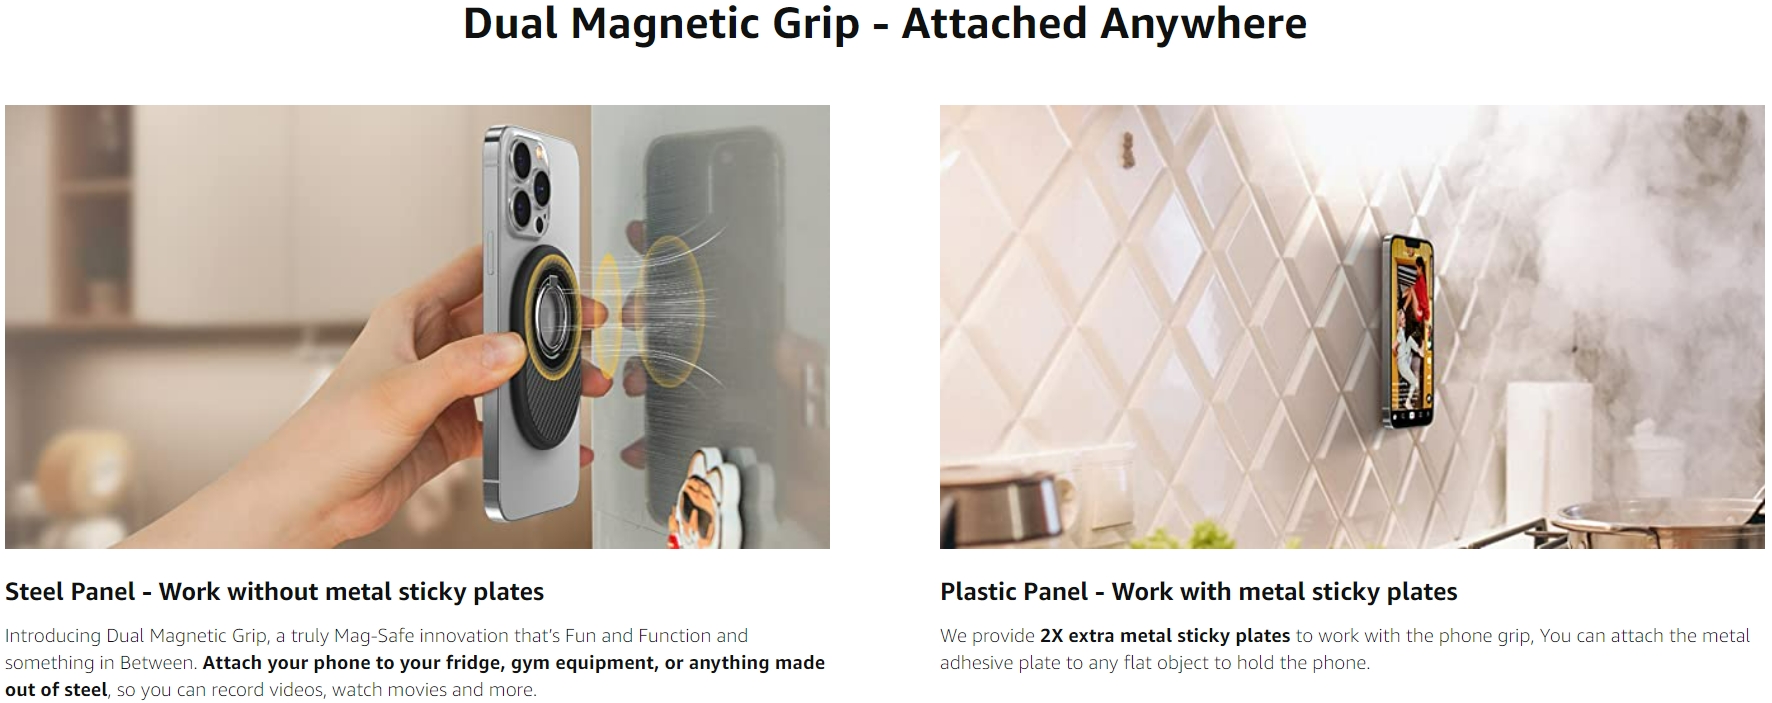 LIVE] Easyfly Double-Sided Mag Phone Grip - Free Your Hands, Enjoy Your Life